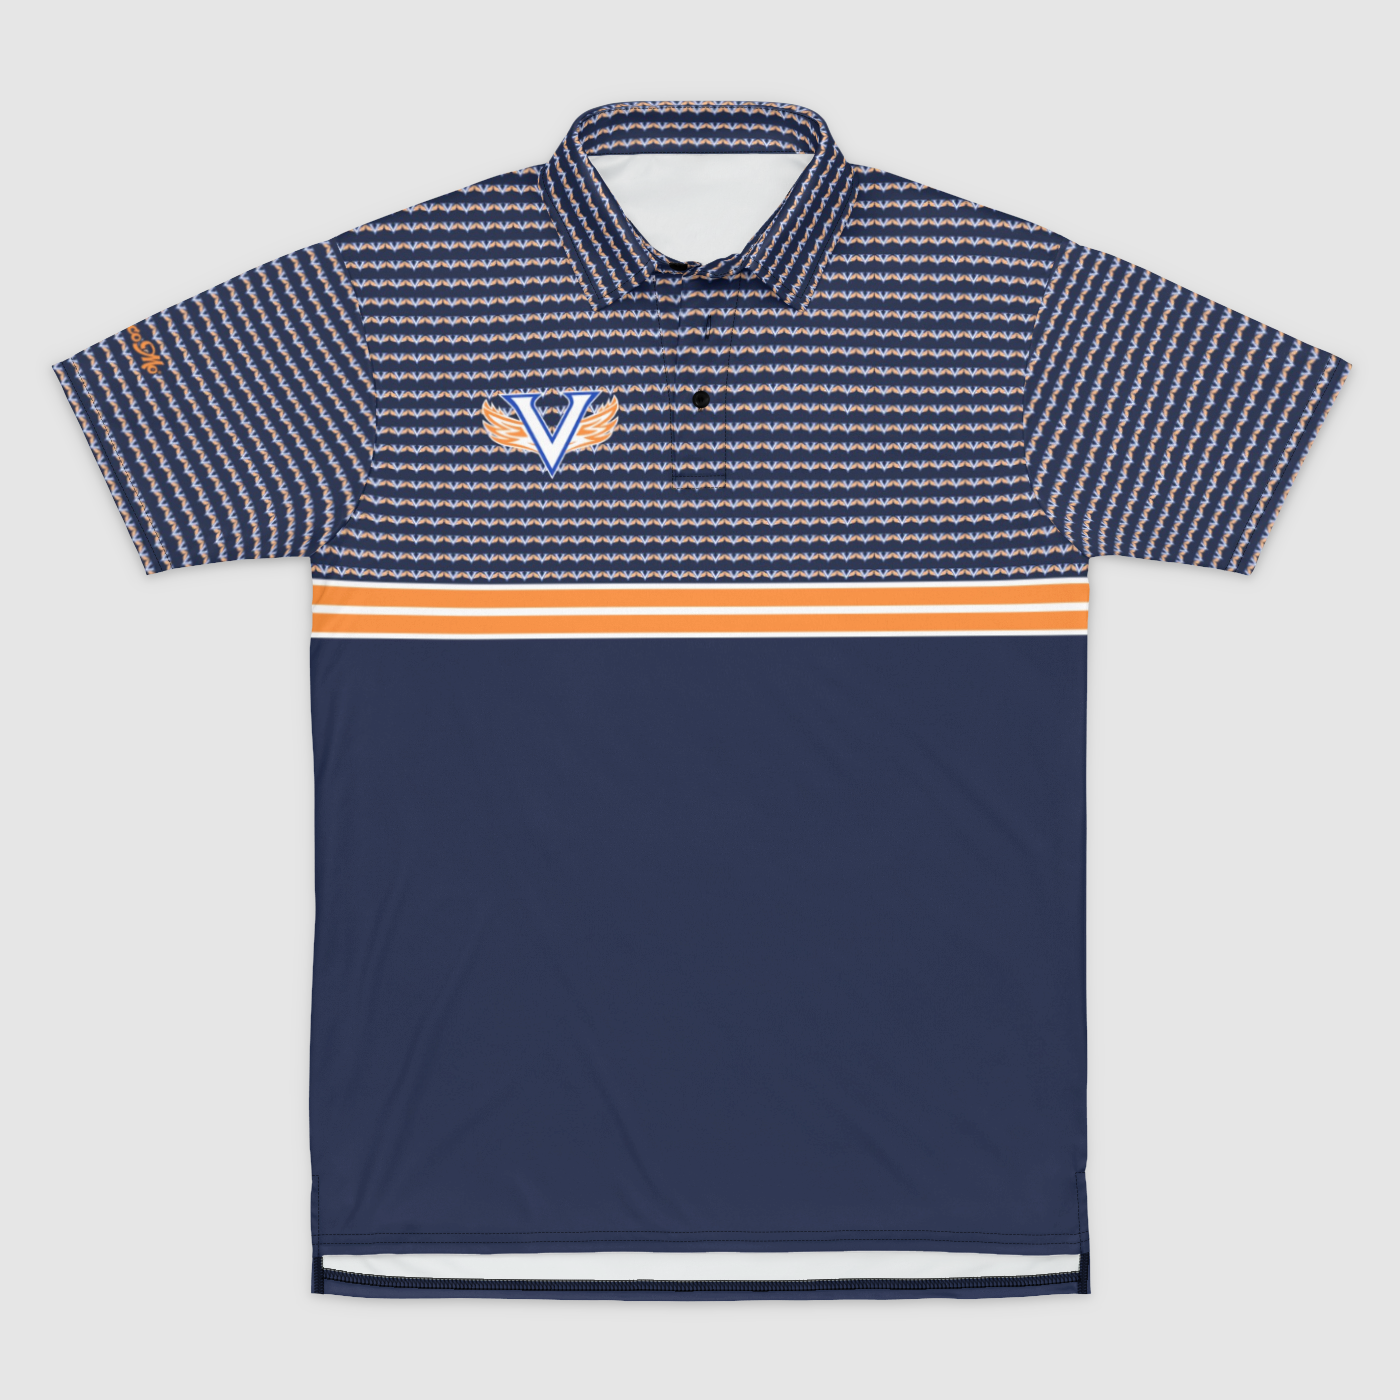 Falcons Volleyball Flying V Polo